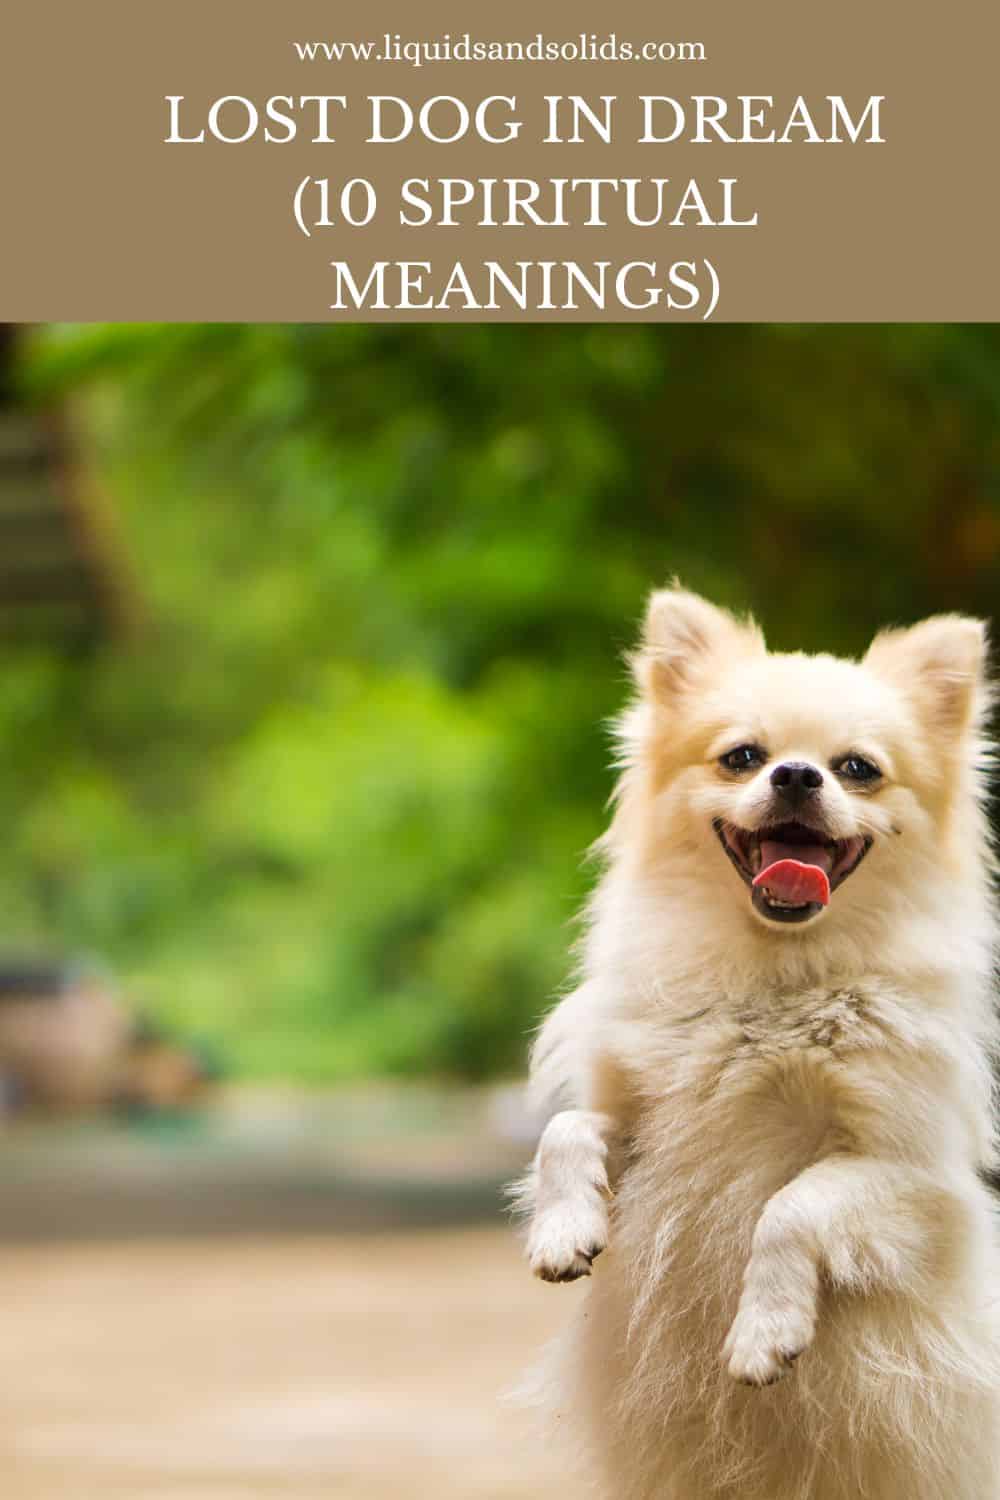 Dream about Lost Dog? (10 Spiritual Meanings)